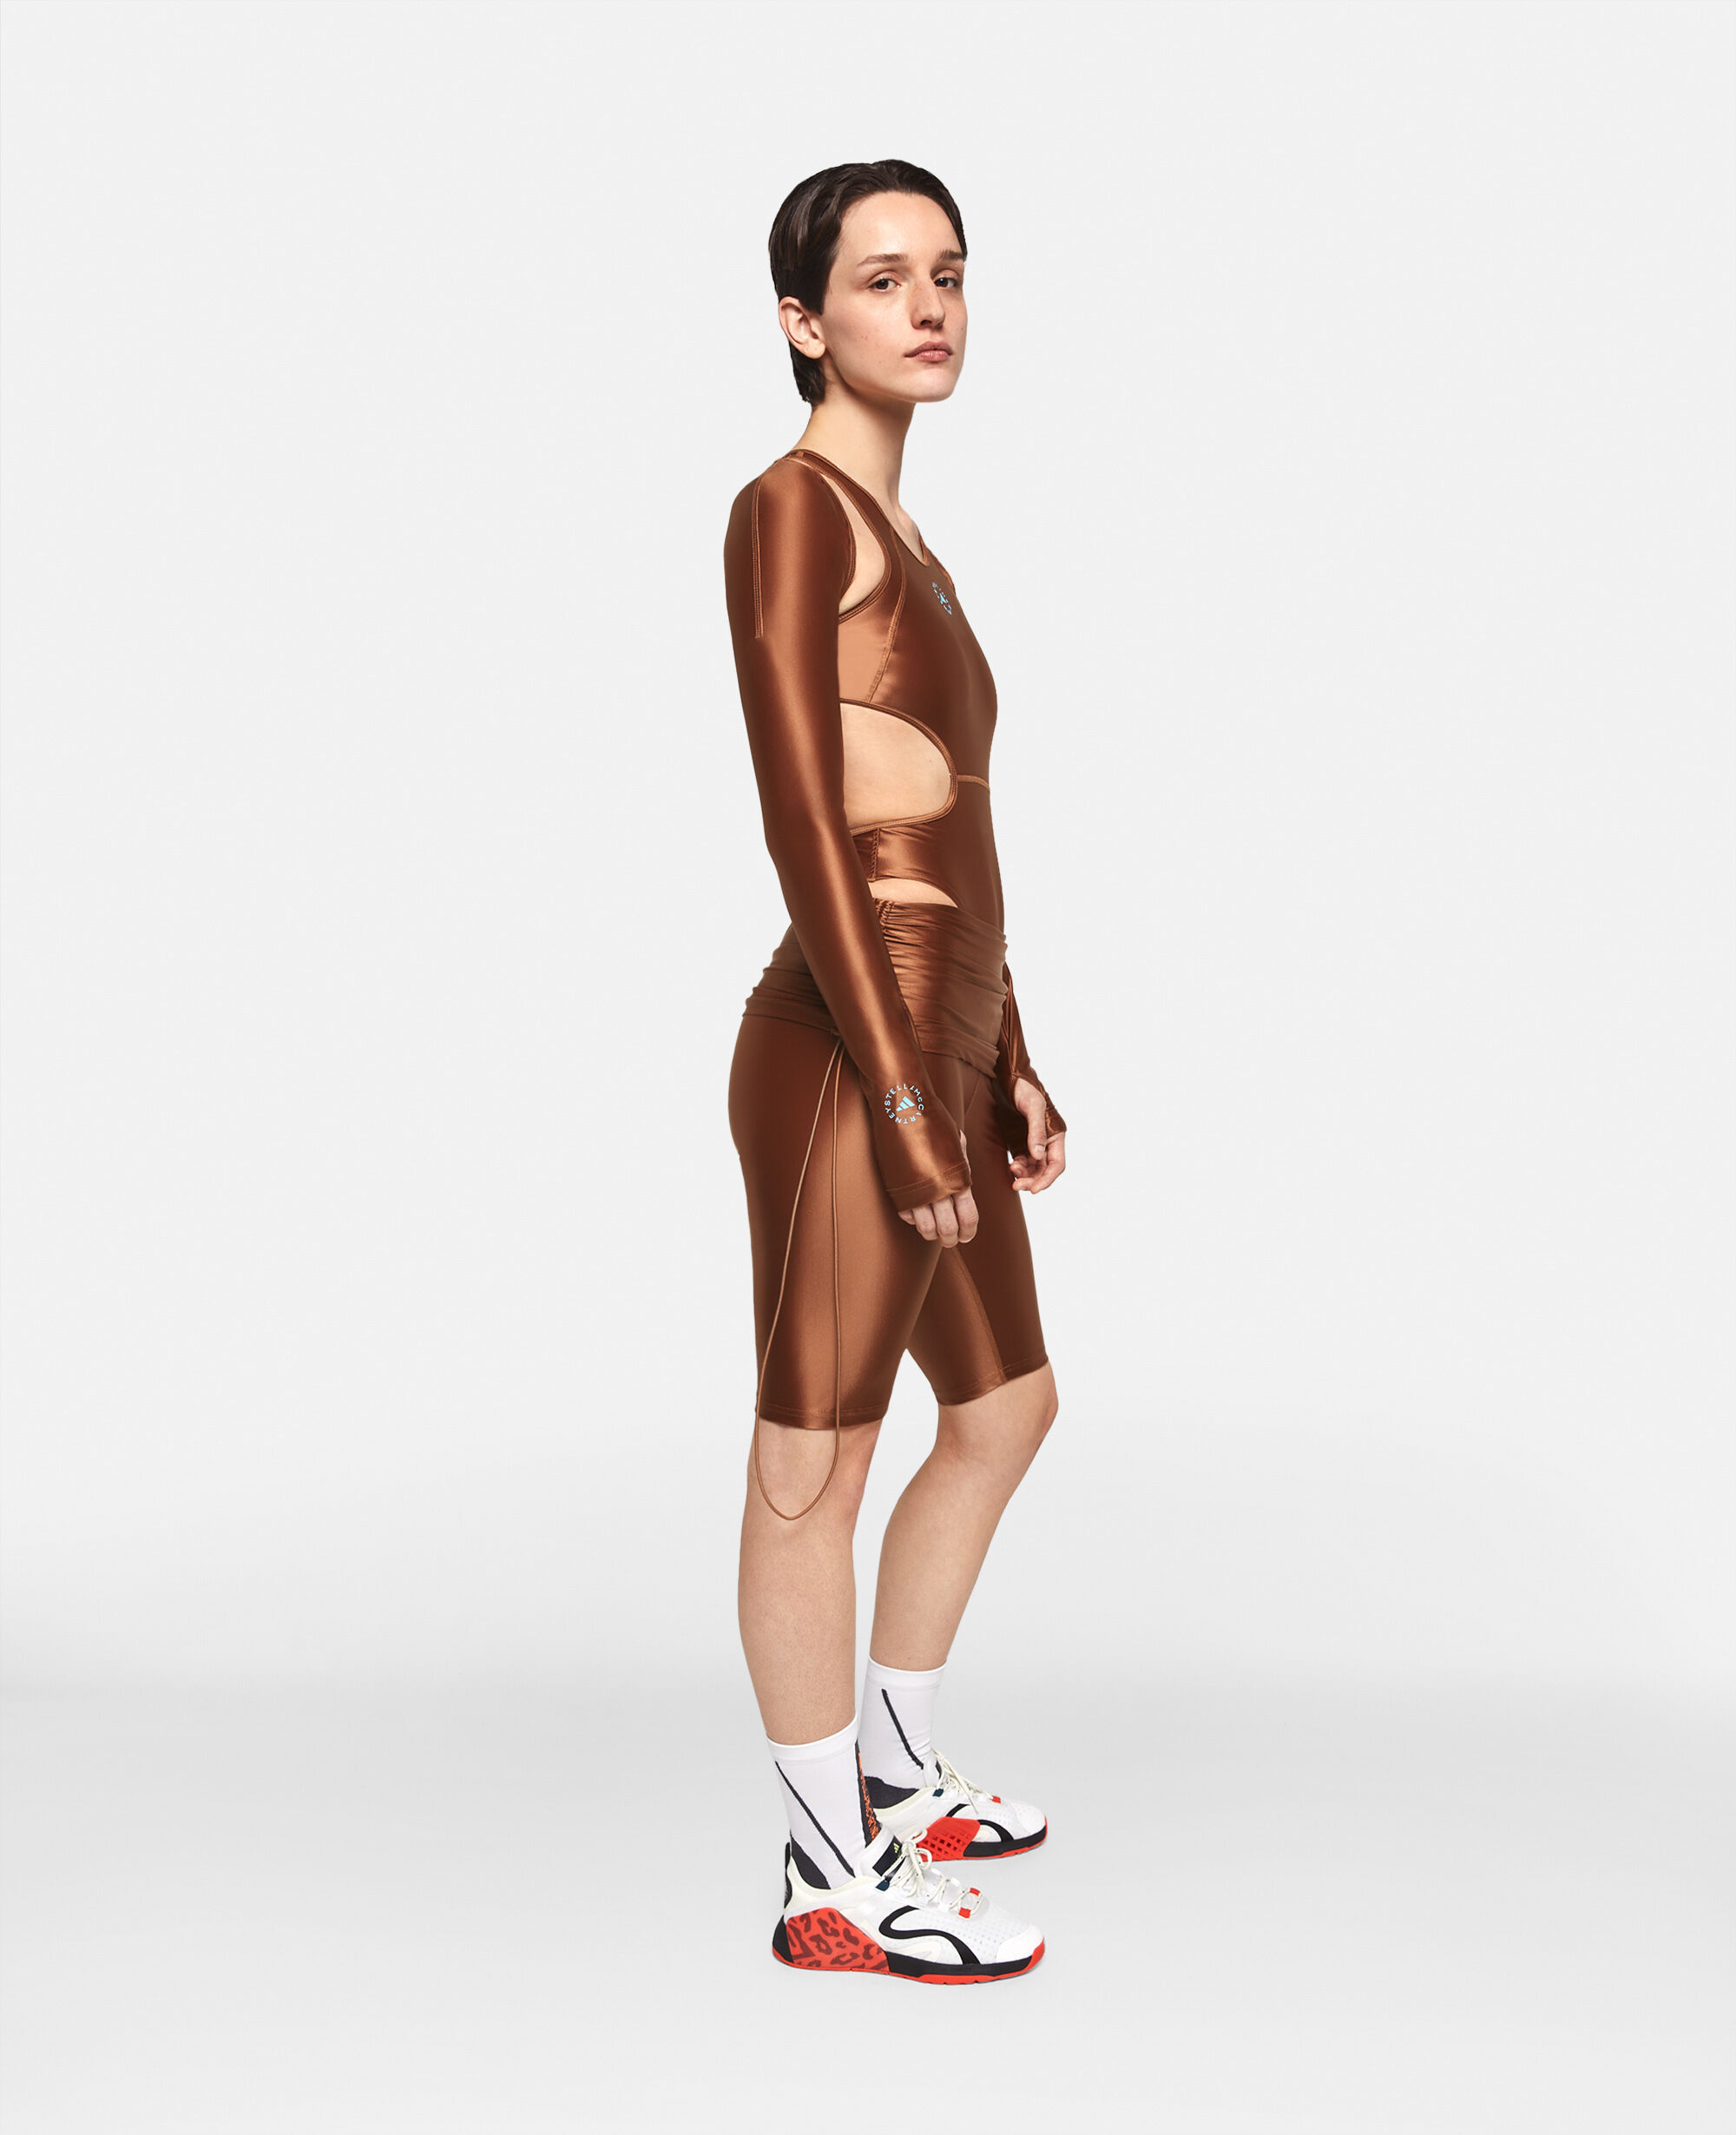 Women's Sports Collection | Adidas By Stella McCartney IL